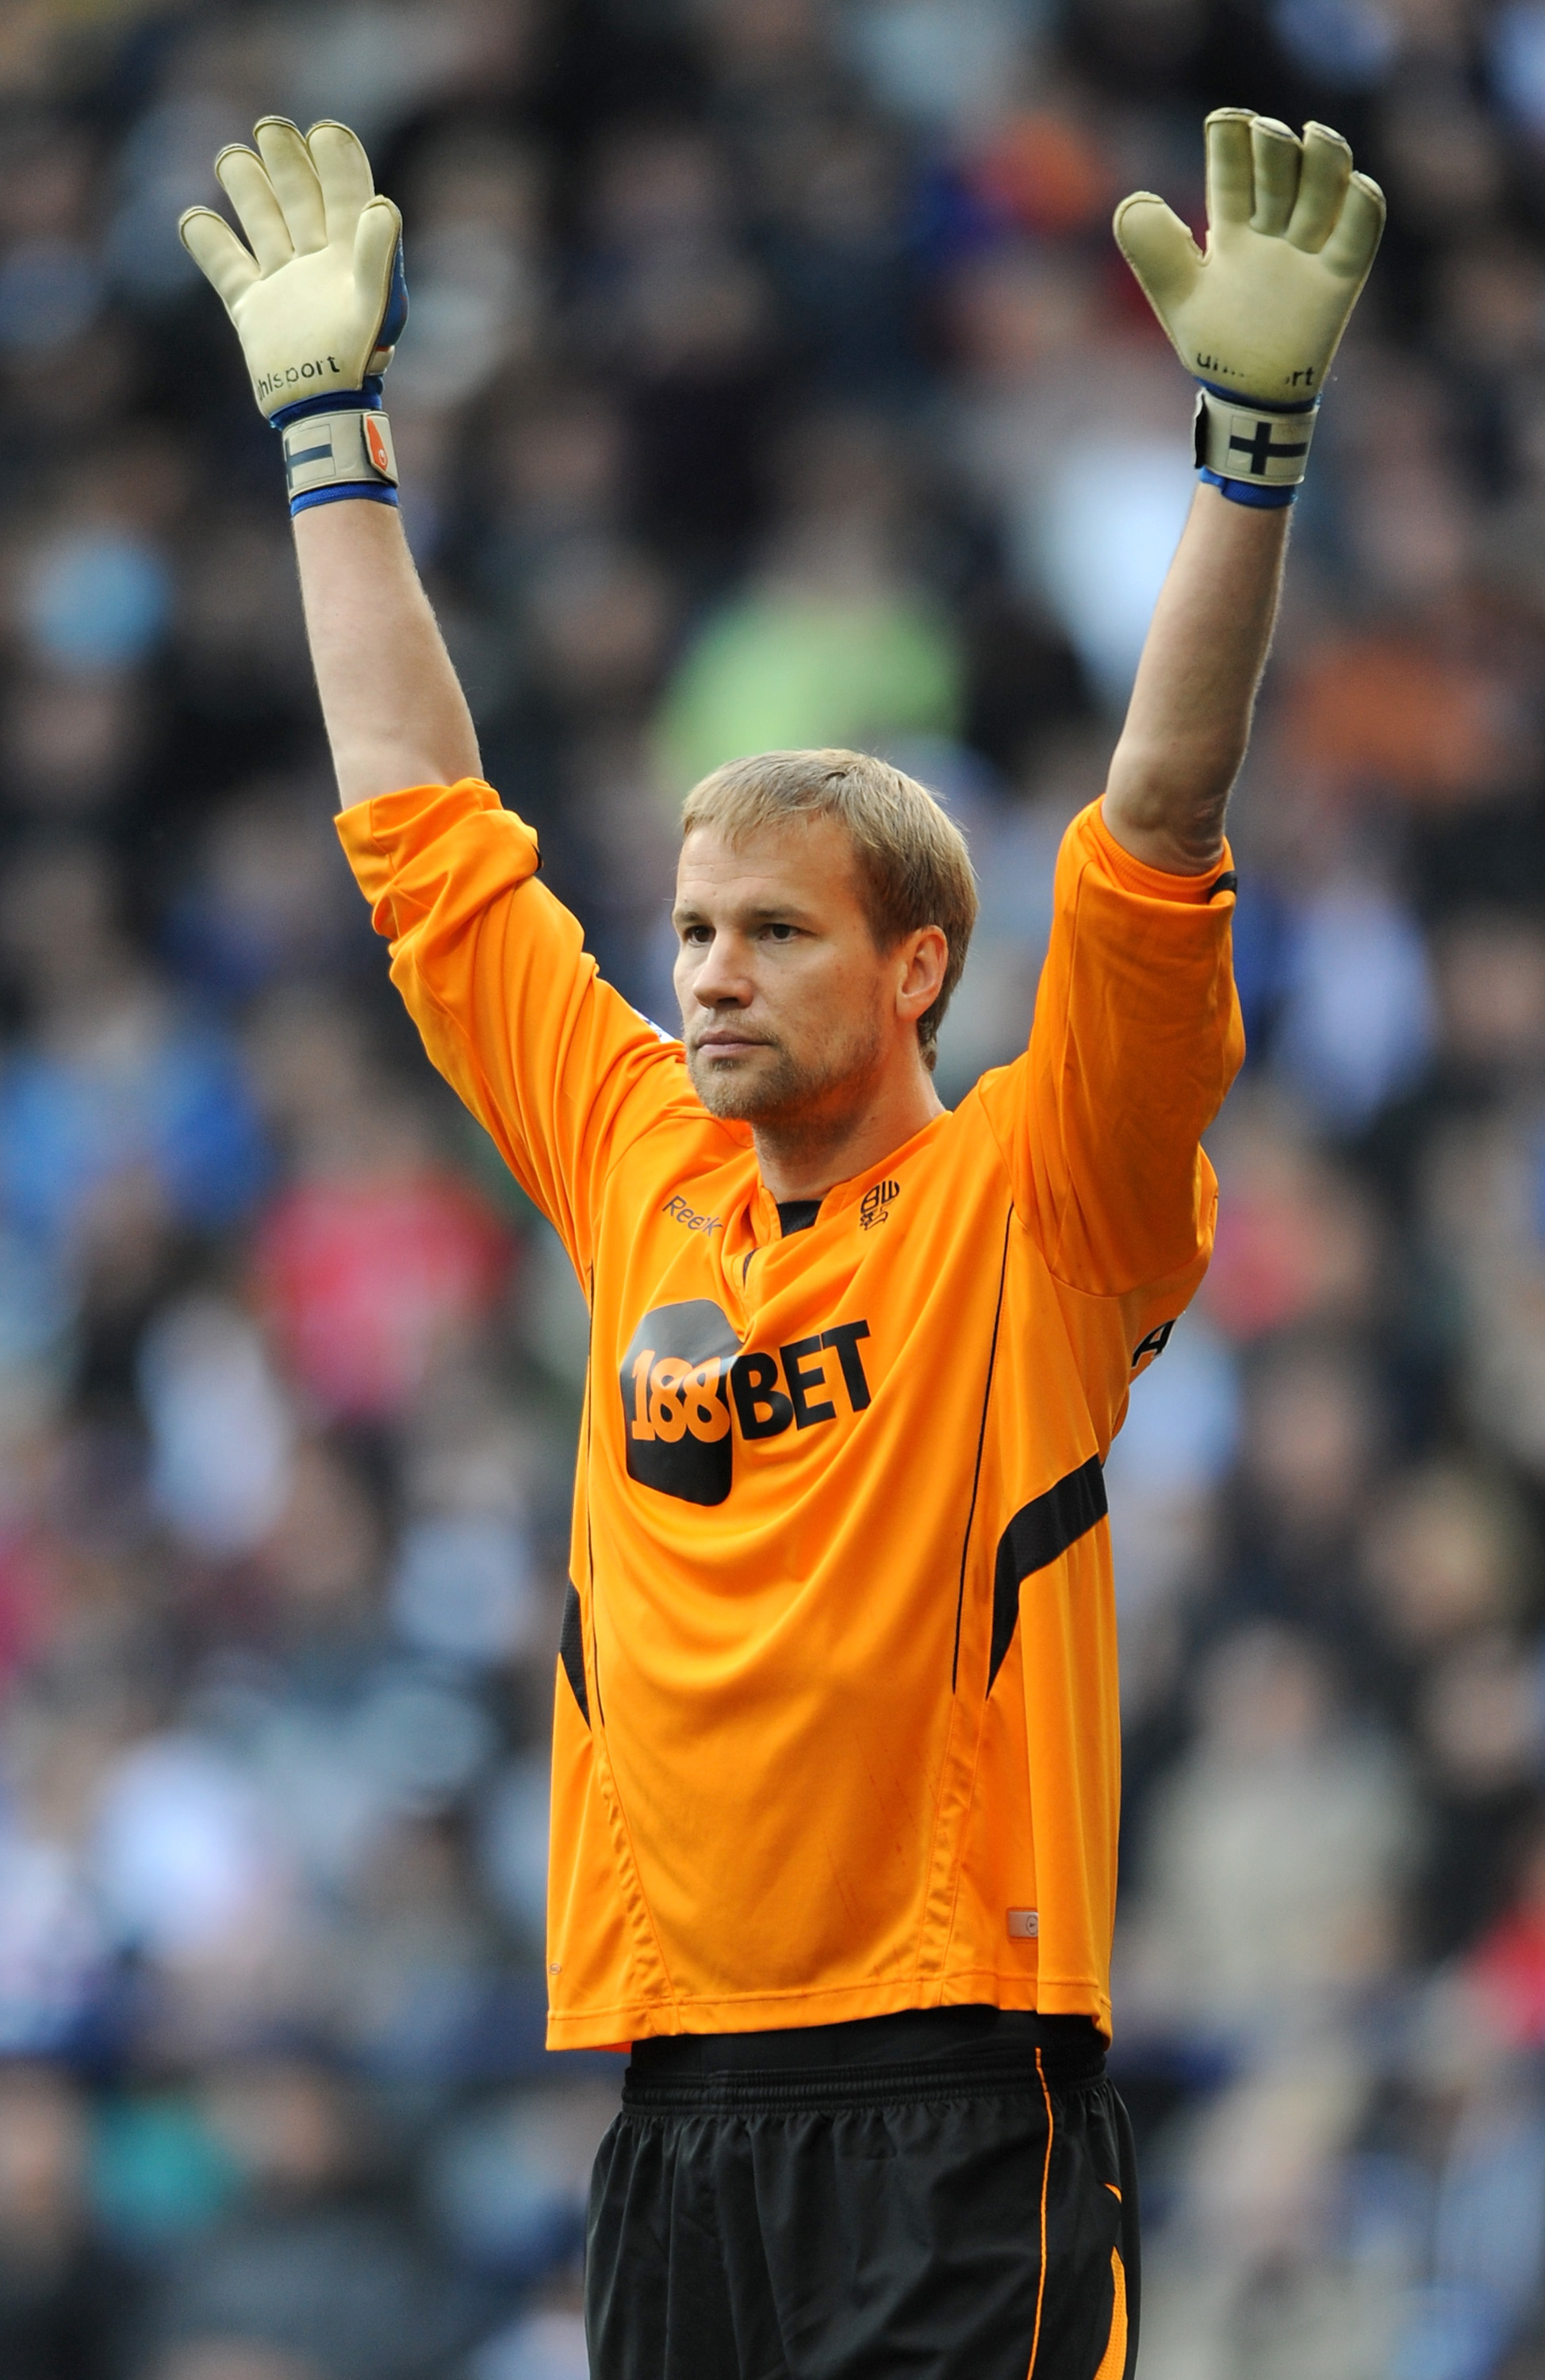 BOLTON, ENGLAND - OCTOBER 16: Jussi Jaaskelainen of Bolton Wanderers during the Barclays Premier League match between Bolton Wanderers and Stoke City at Reebok Stadium on October 16, 2010 in Bolton, England.  (Photo by Chris Brunskill/Getty Images)